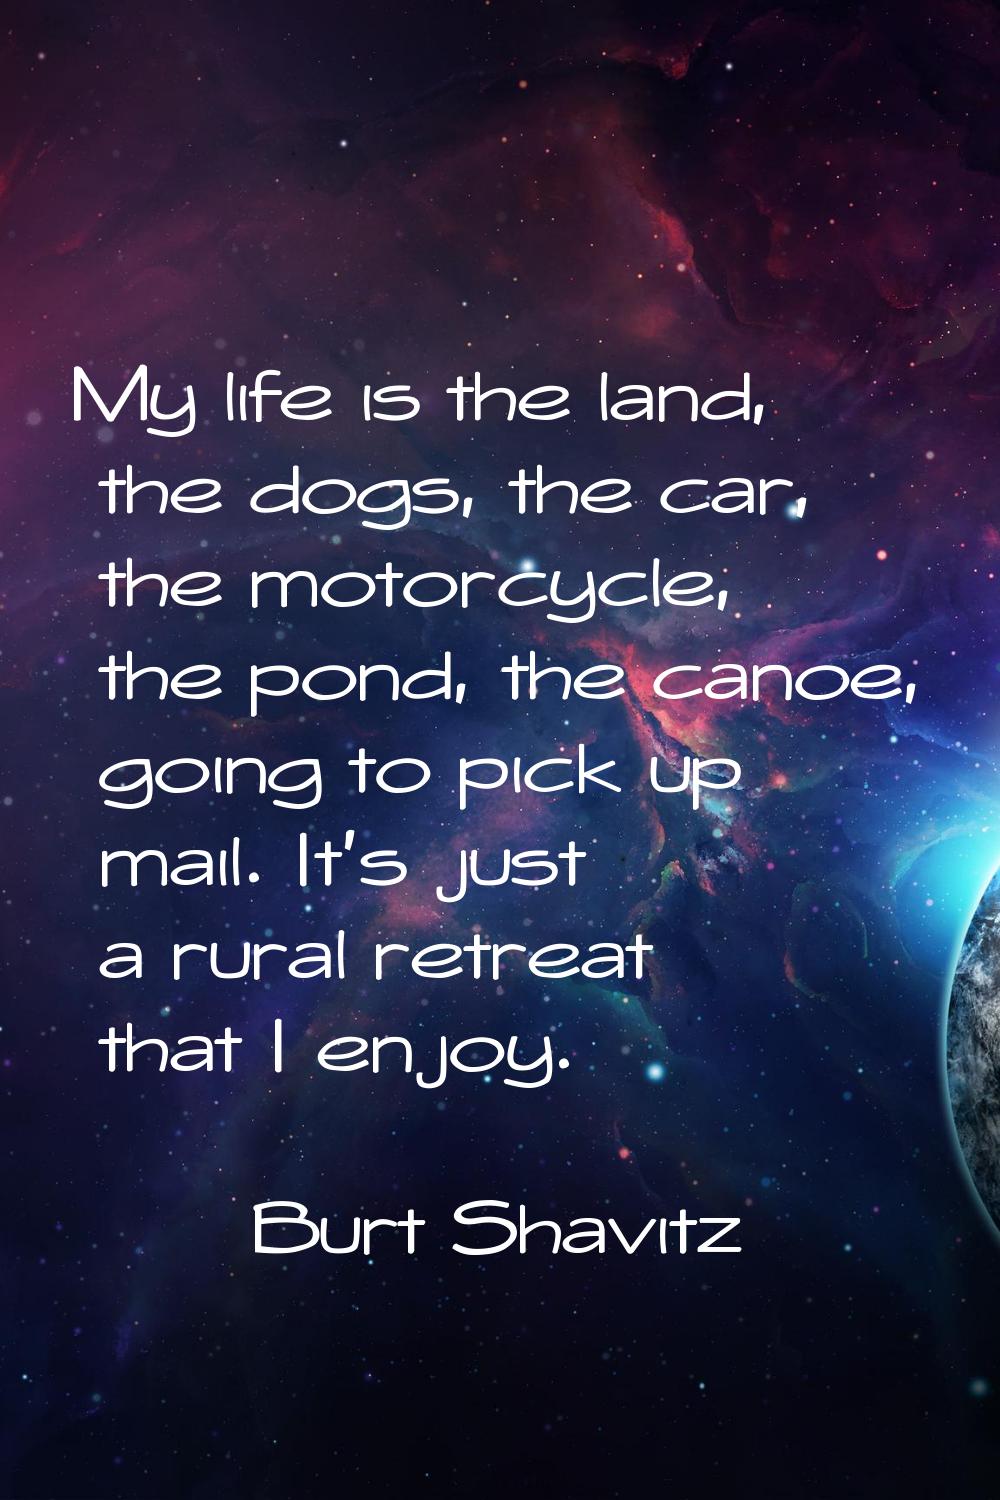 My life is the land, the dogs, the car, the motorcycle, the pond, the canoe, going to pick up mail.